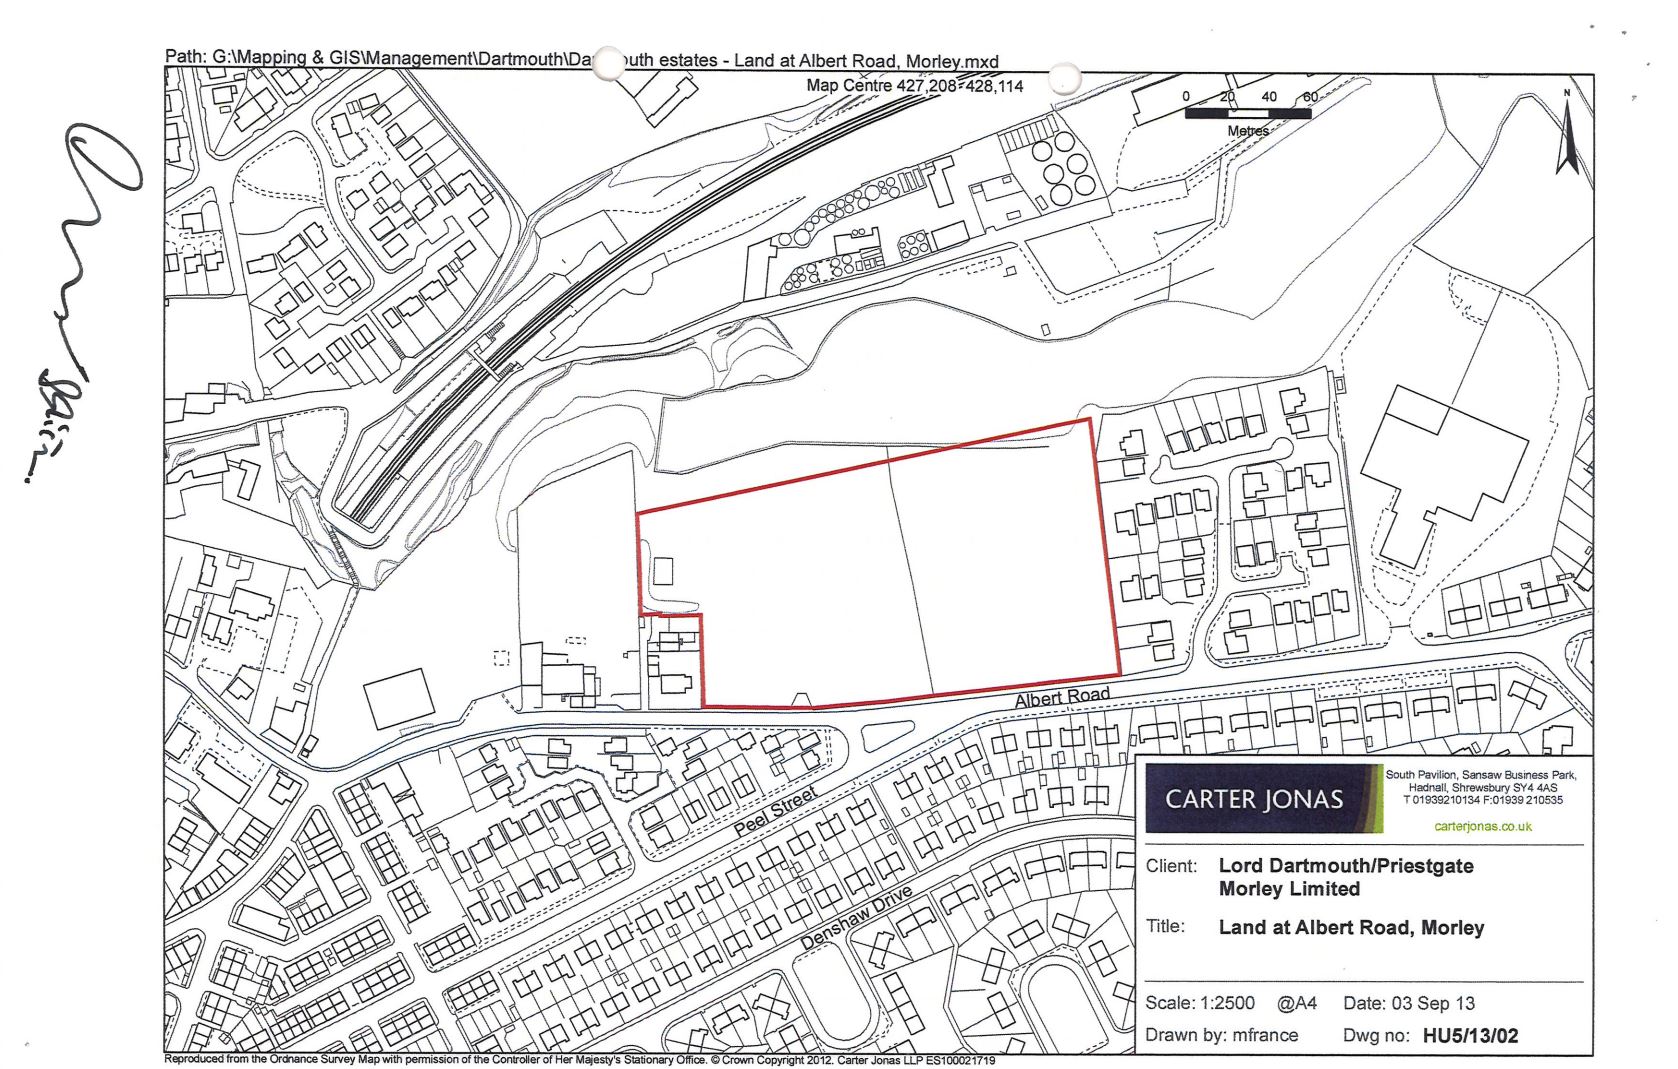 Map showing part of the designated public rights of way on land known as Land at Albert Road, Morley